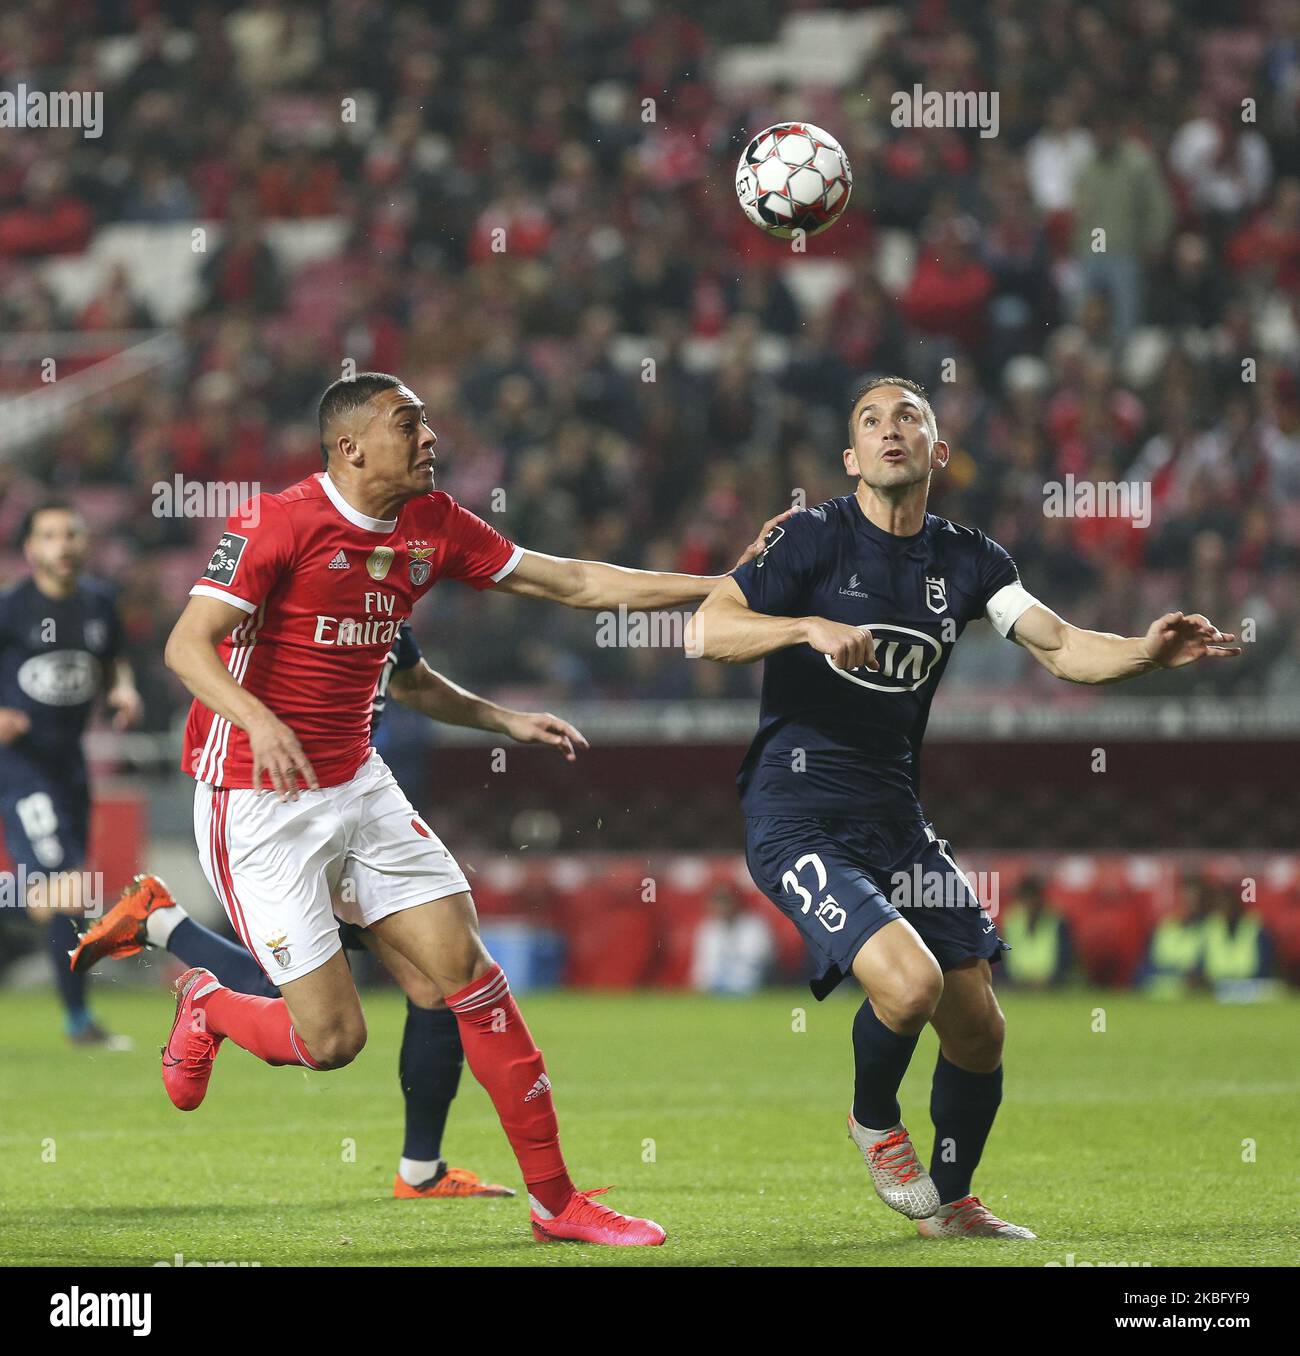 Belenenses SAD Defender Goncalo Silva(R) and SL Benfica Forward Carlos Vinicius(L) in action during the Premier League 2019/20 match between SL Benfica and Belenenses SAD, at Luz Stadium in Lisbon on January 31, 2020. (Photo by Paulo Nascimento / NurPhoto) (Photo by Paulo Nascimento/NurPhoto) Stock Photo